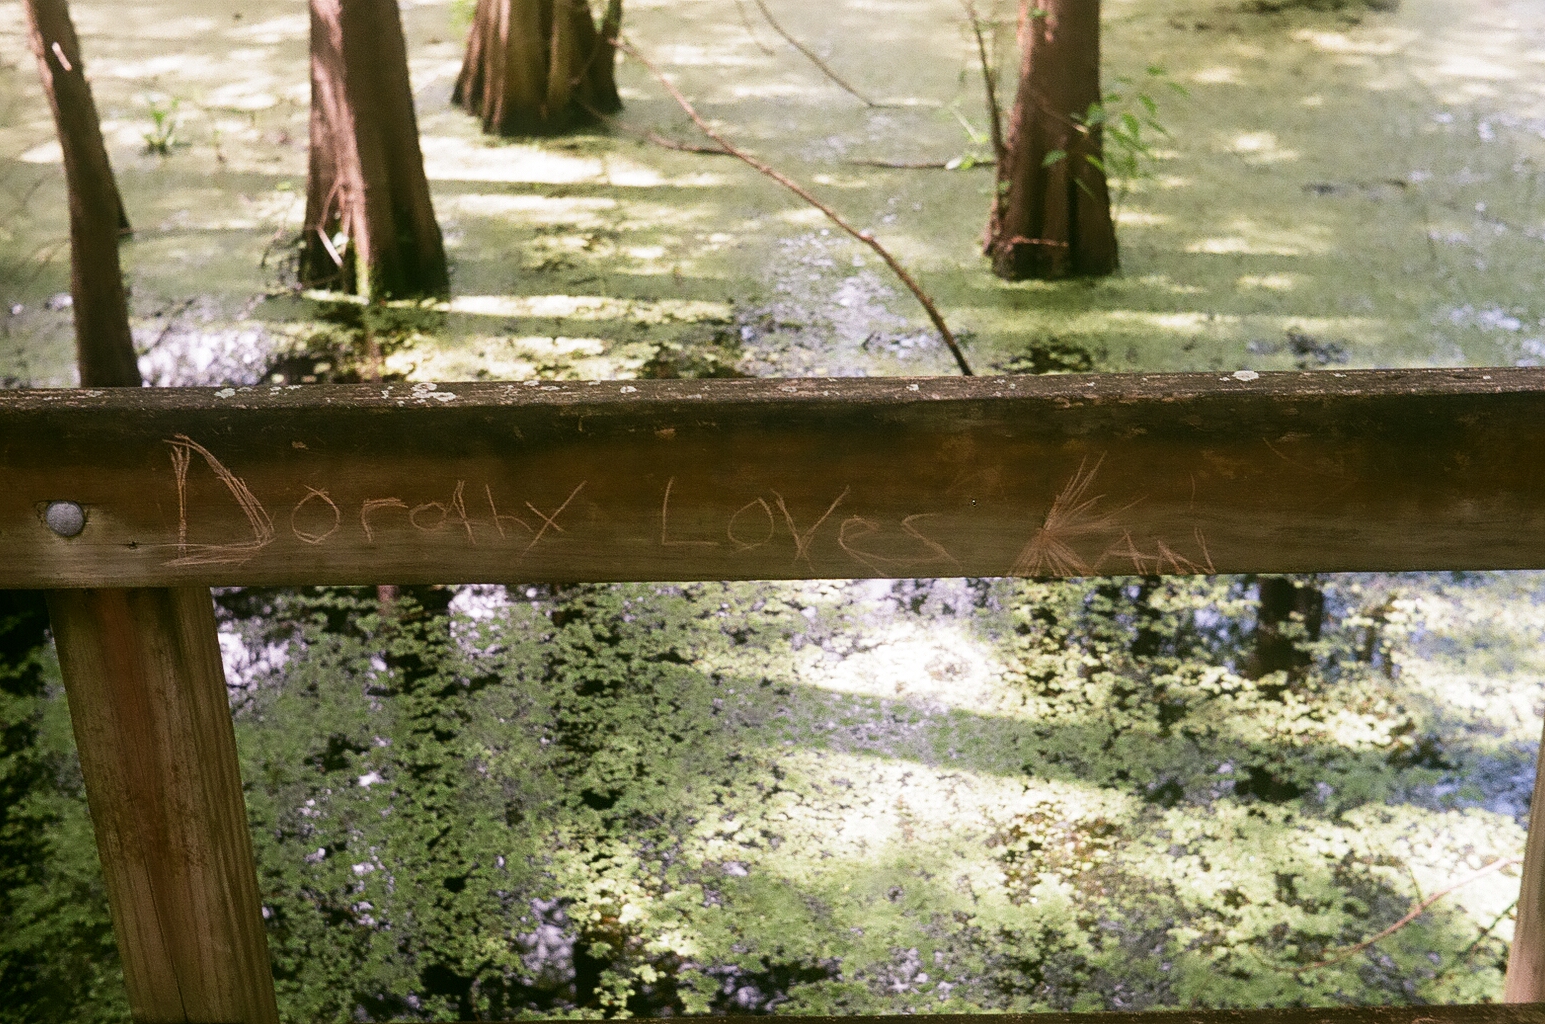 Graffiti scratched on the railing: 'Dorothy Loves Kan'